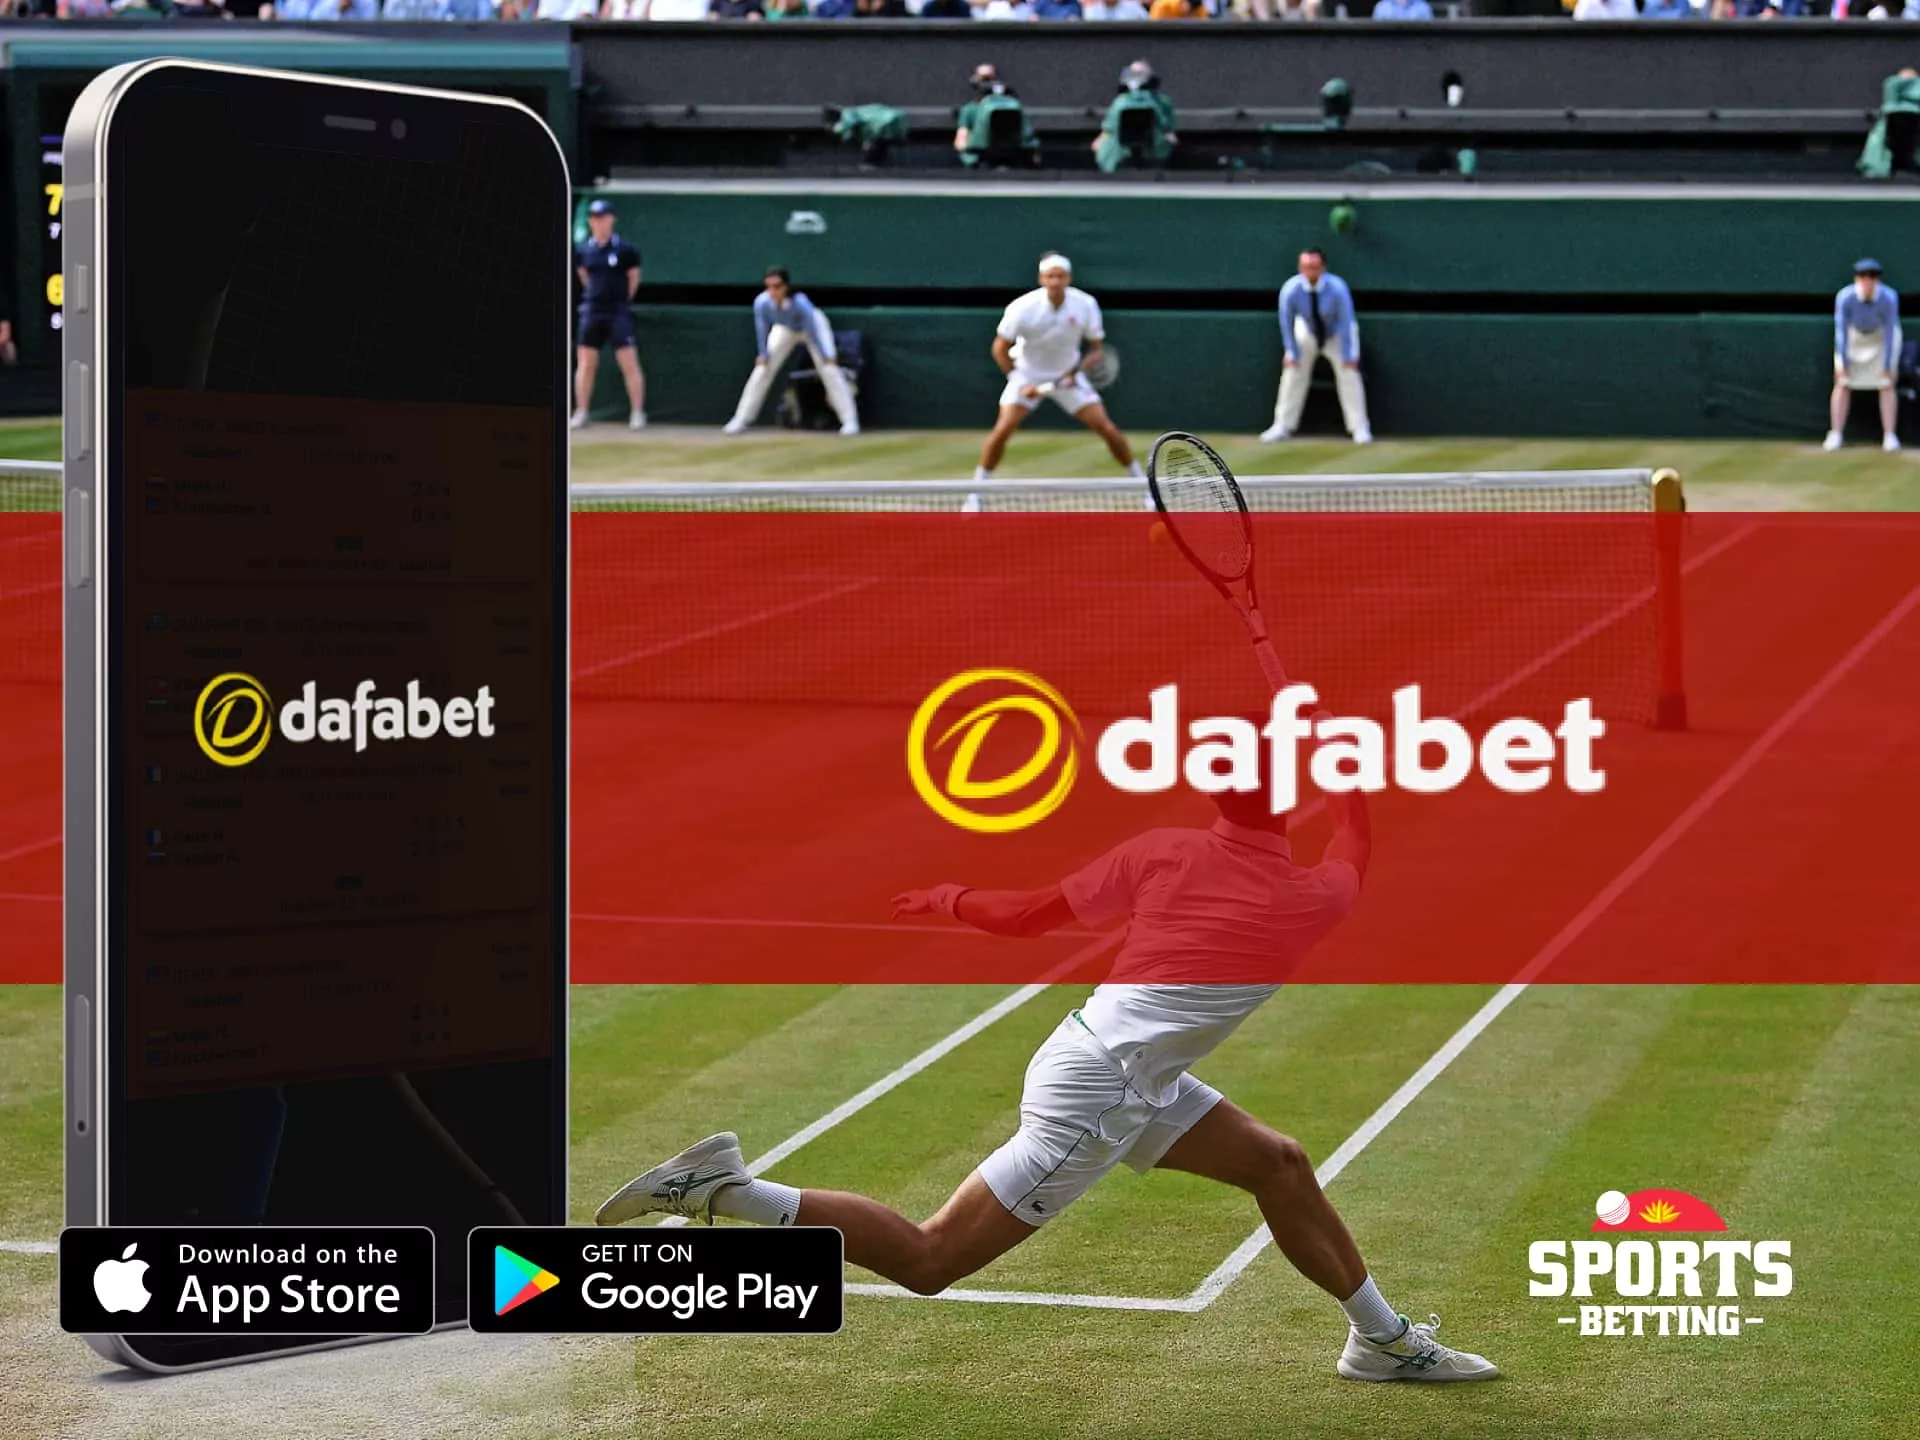 Dafabet tennis betting site with payment systems are convenient for Bangladeshi bettors.